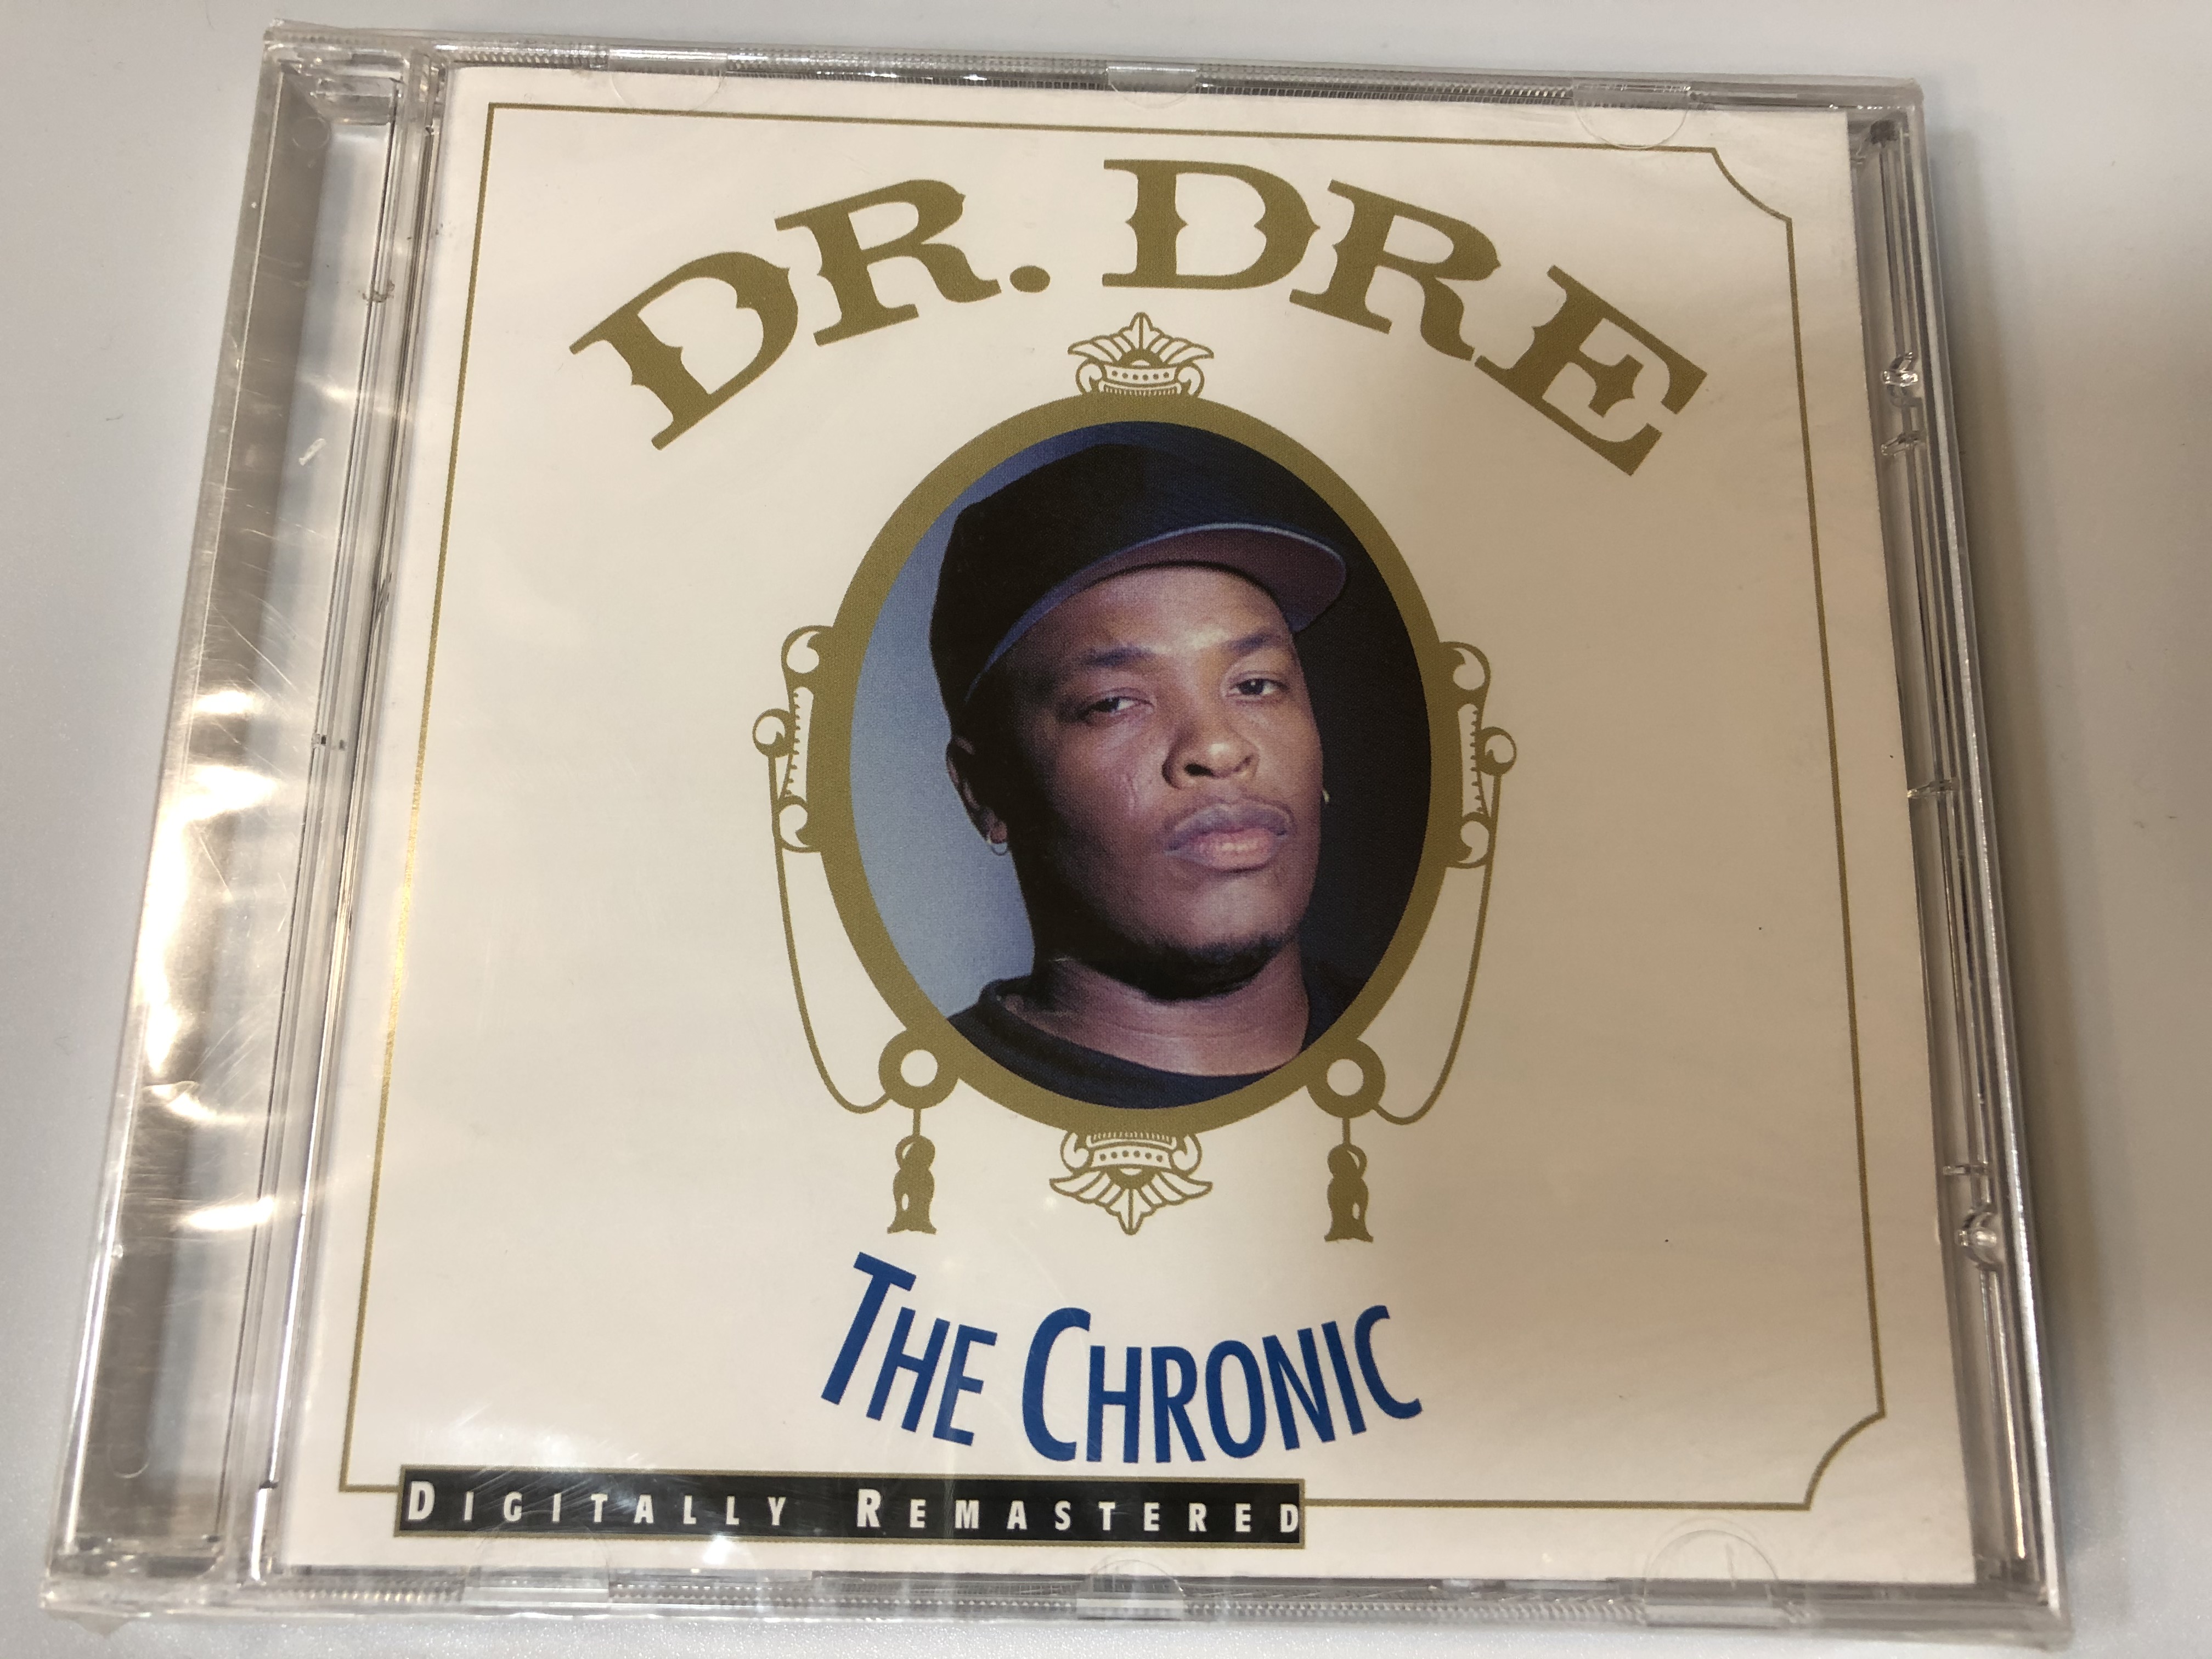 dr.-dre-the-chronic-digitally-remastered-death-row-records-audio-cd-2001-pdr1001-1-.jpg